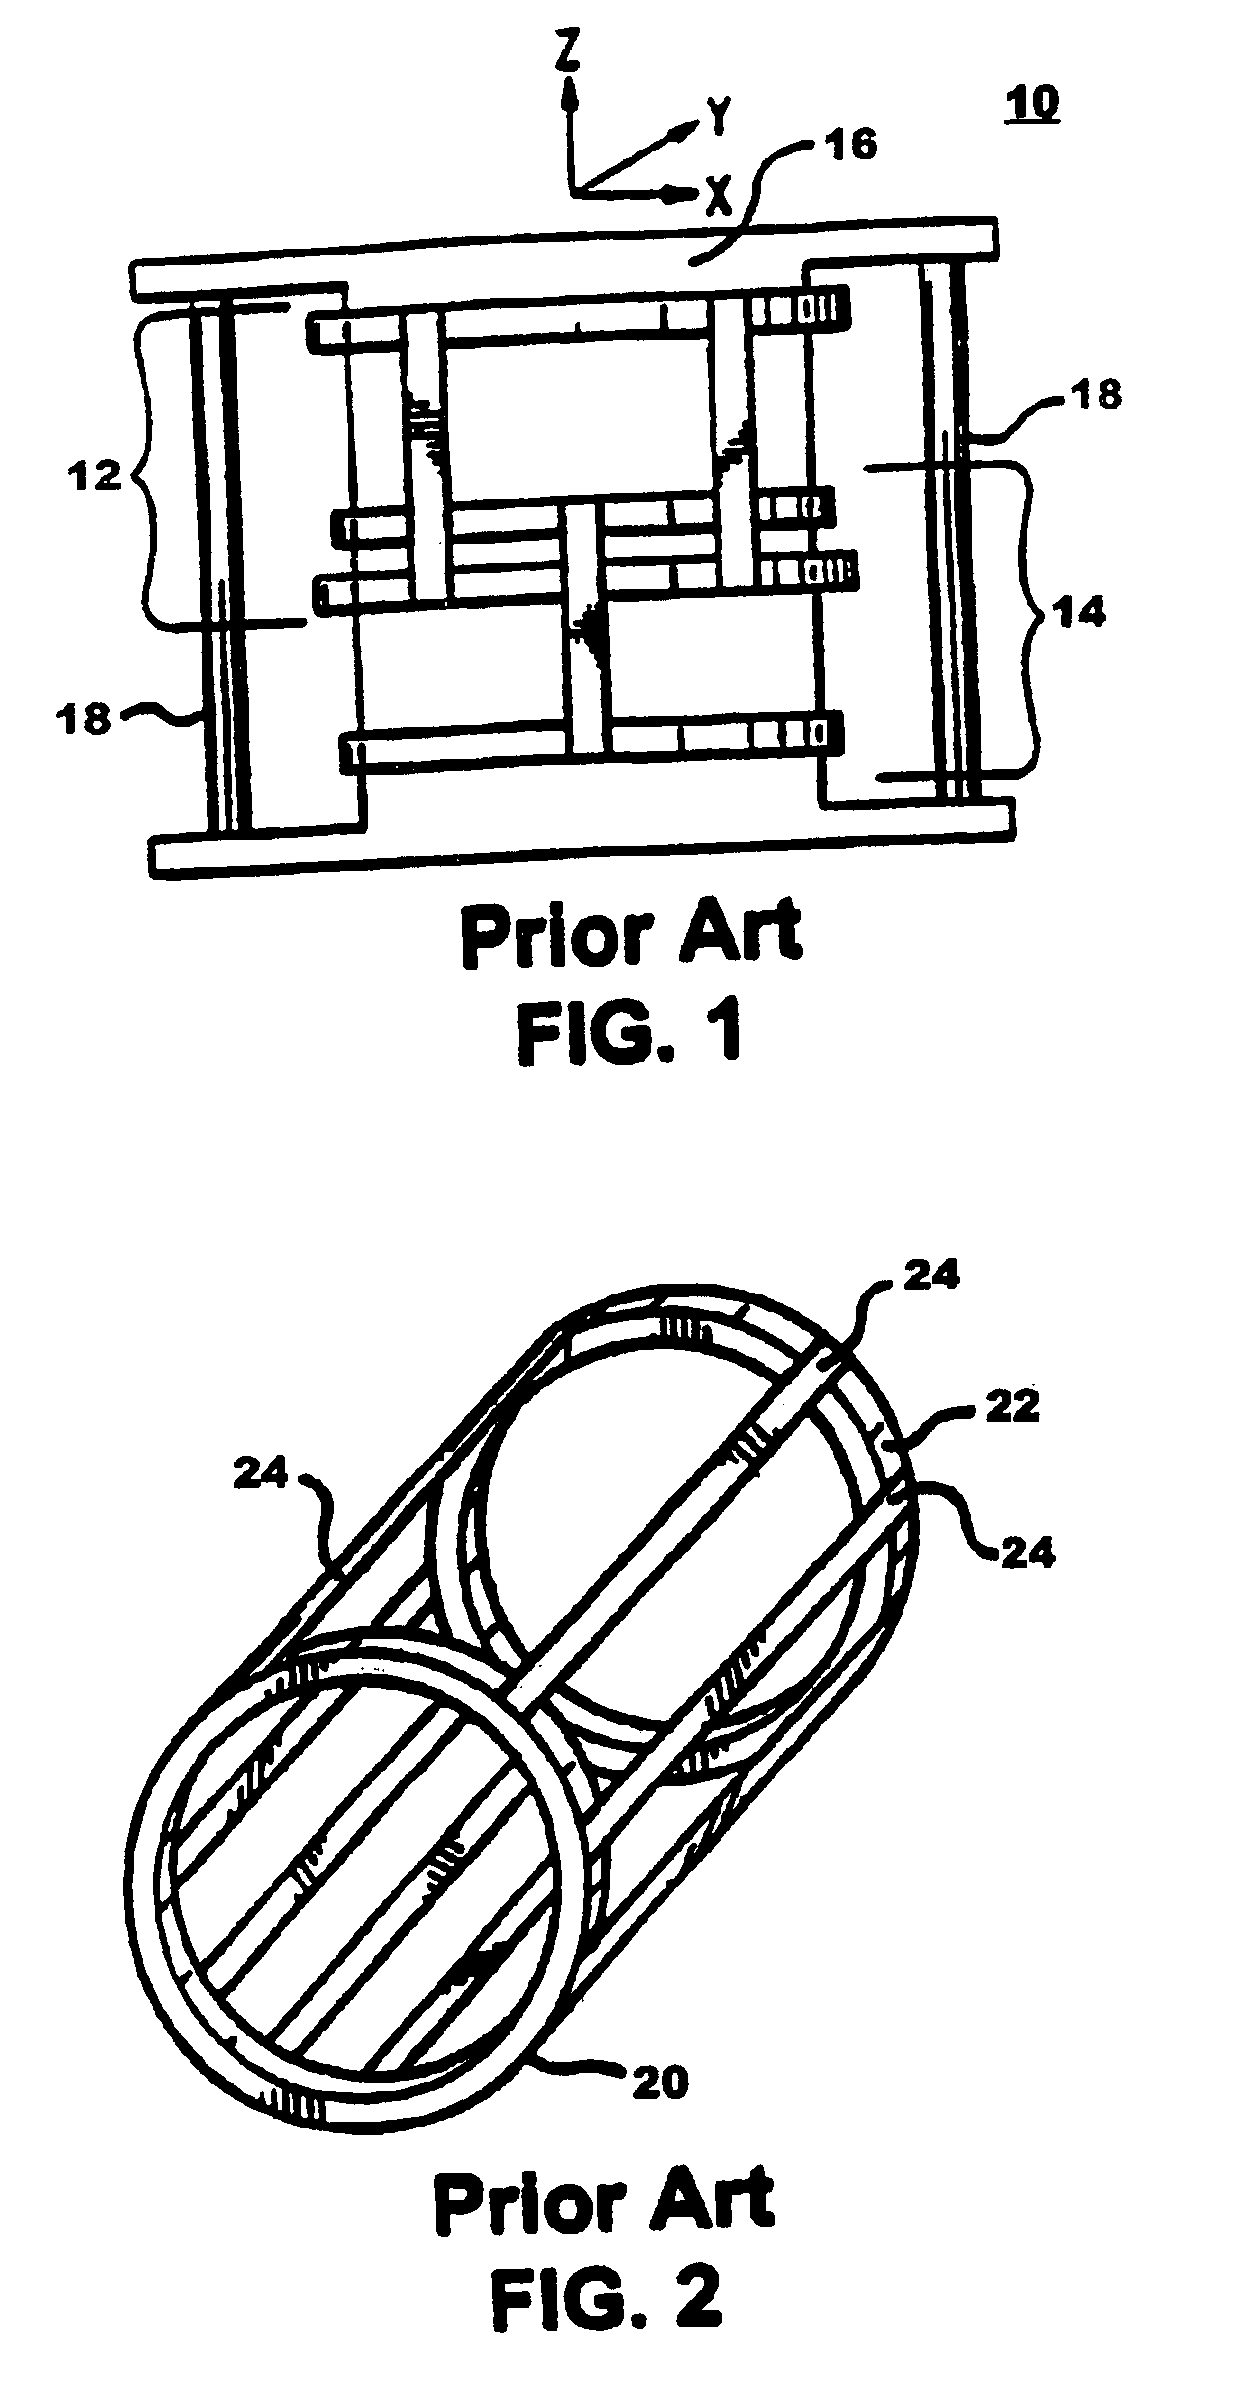 Transmit/receive phased array coil system